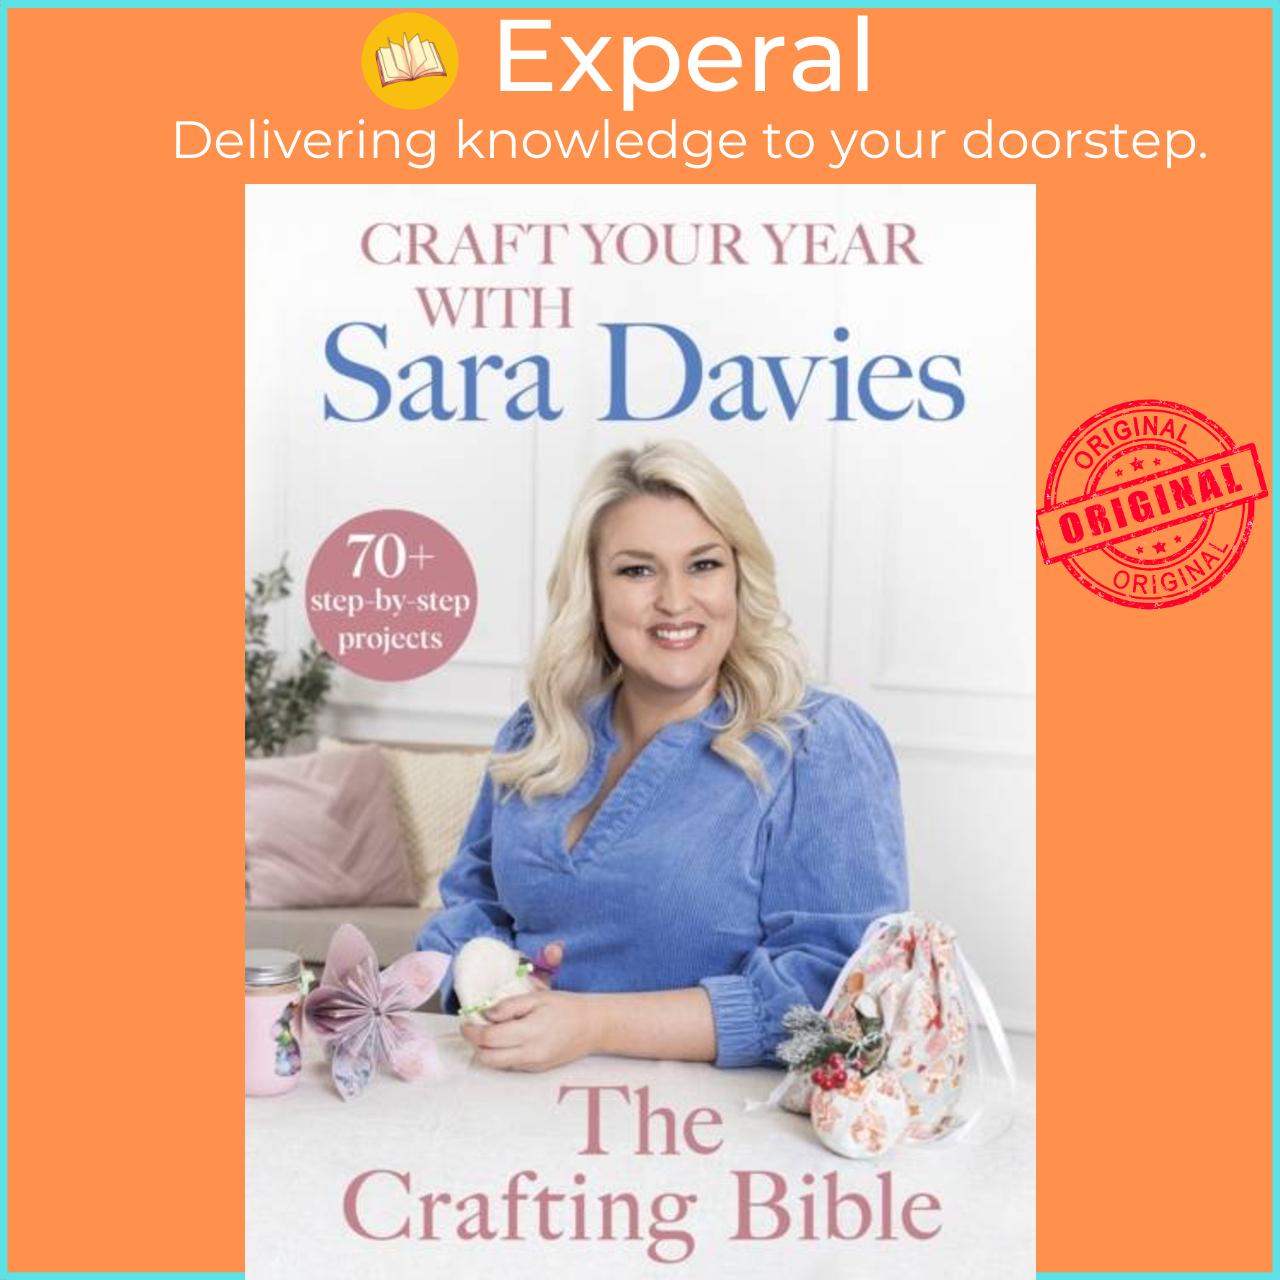 Sách - Craft Your Year with Sara Davies - Crafting Queen, Dragons' Den and Strict by Sara Davies (UK edition, hardcover)